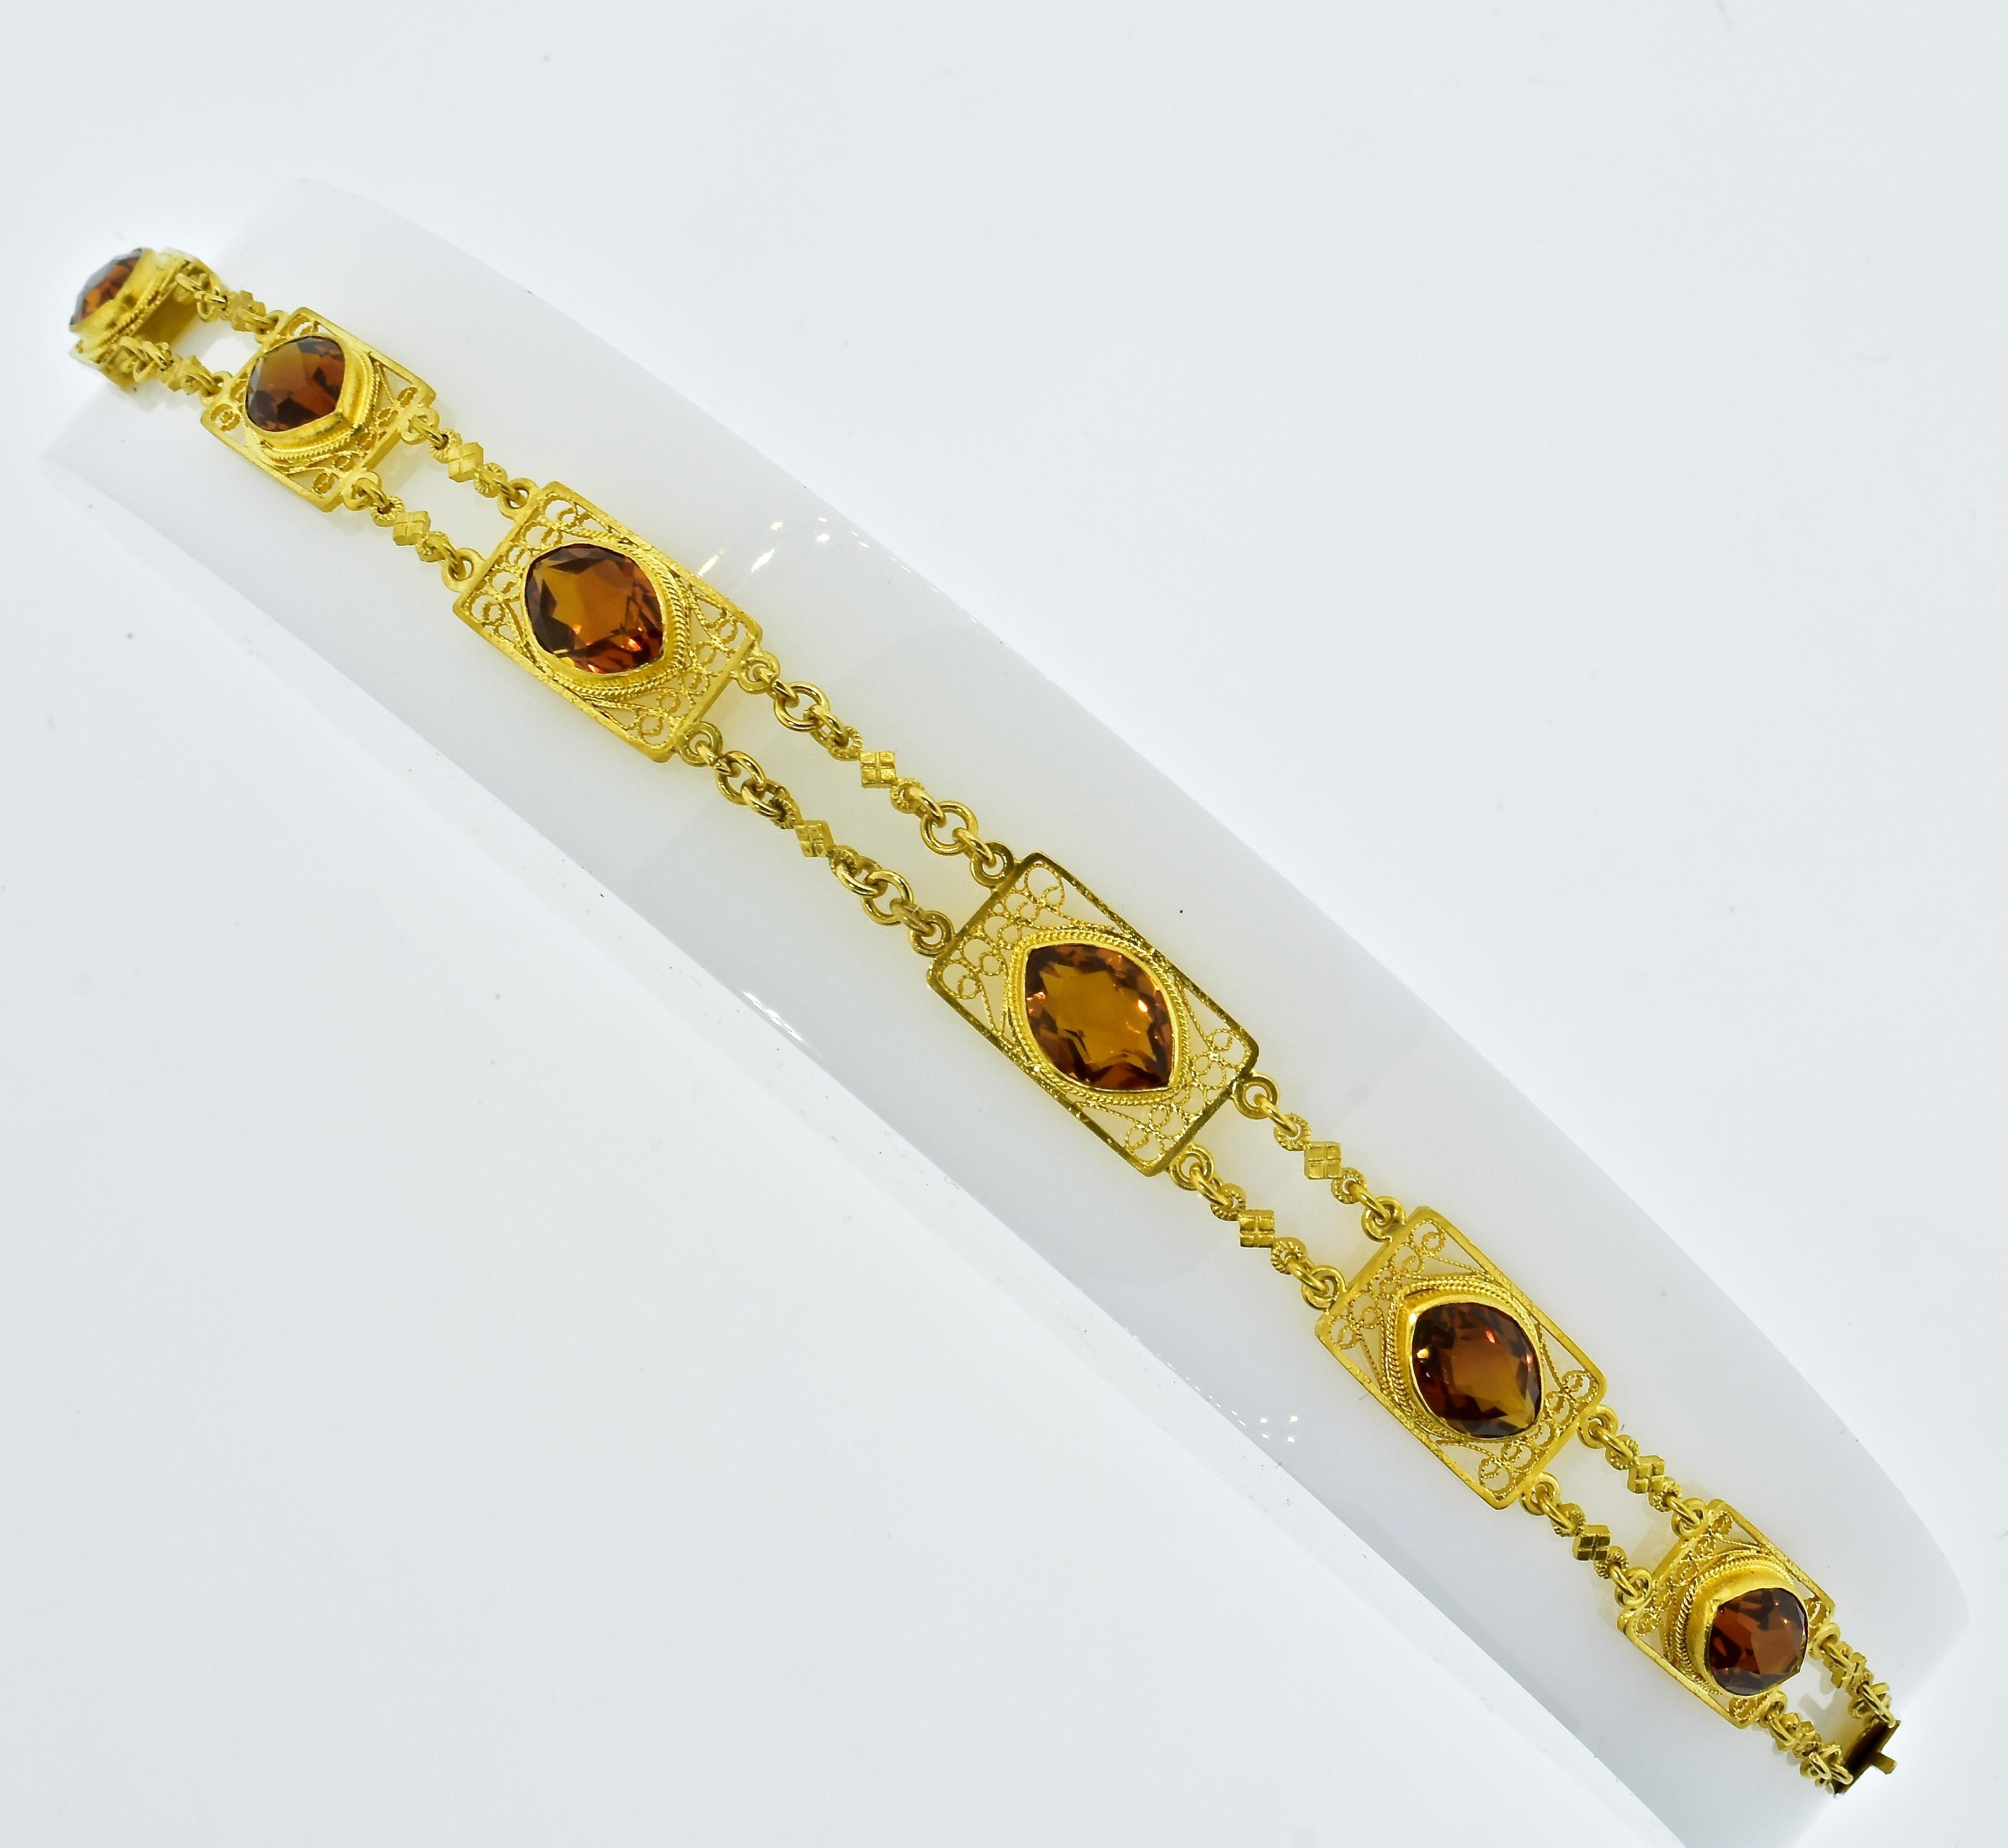 Antique, Arts & Crafts Era, hand made bracelet possessing 6 marquis cut natural deep orange citrines.  Often called Madeira-colored Citrine, these stones, weighing totally approximately 15 cts., are all well matched with fine vibrant clear color. 